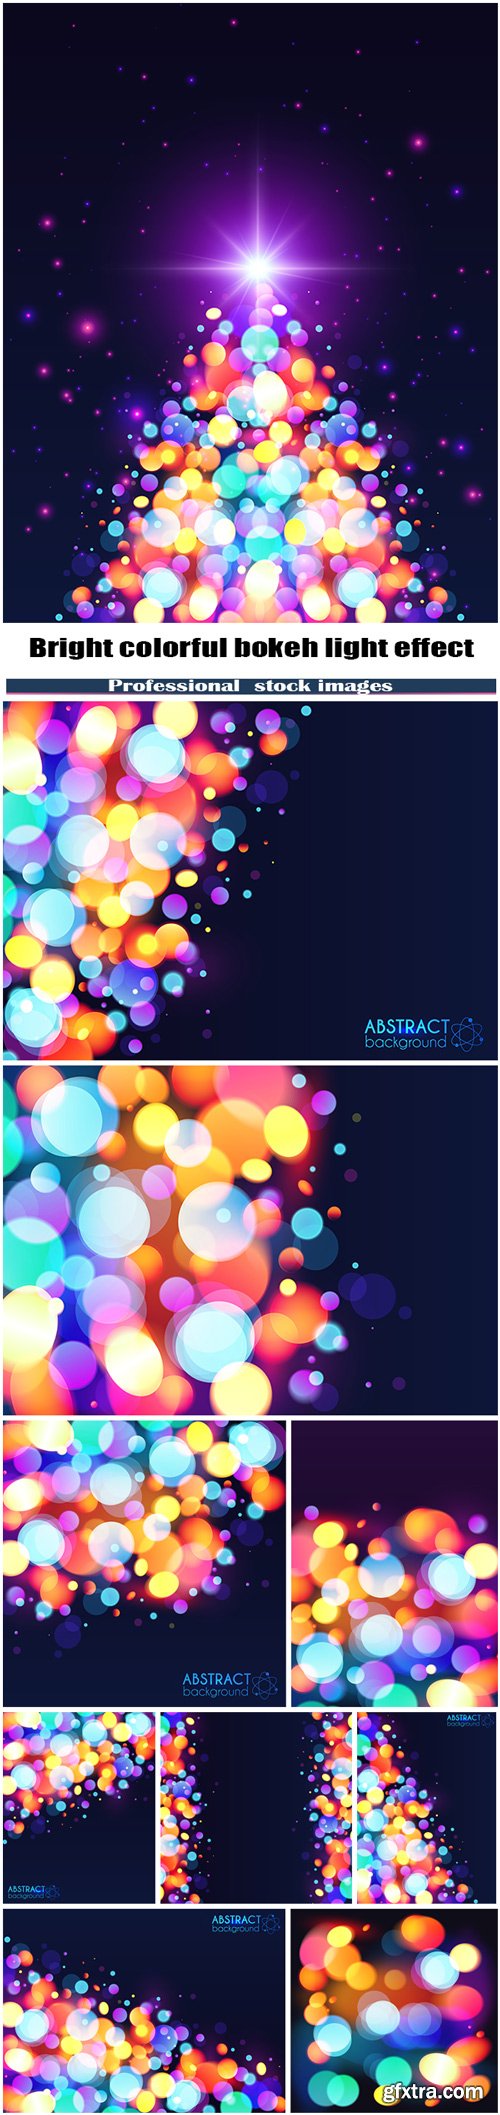 Bright colorful bokeh light effect vector abstract background